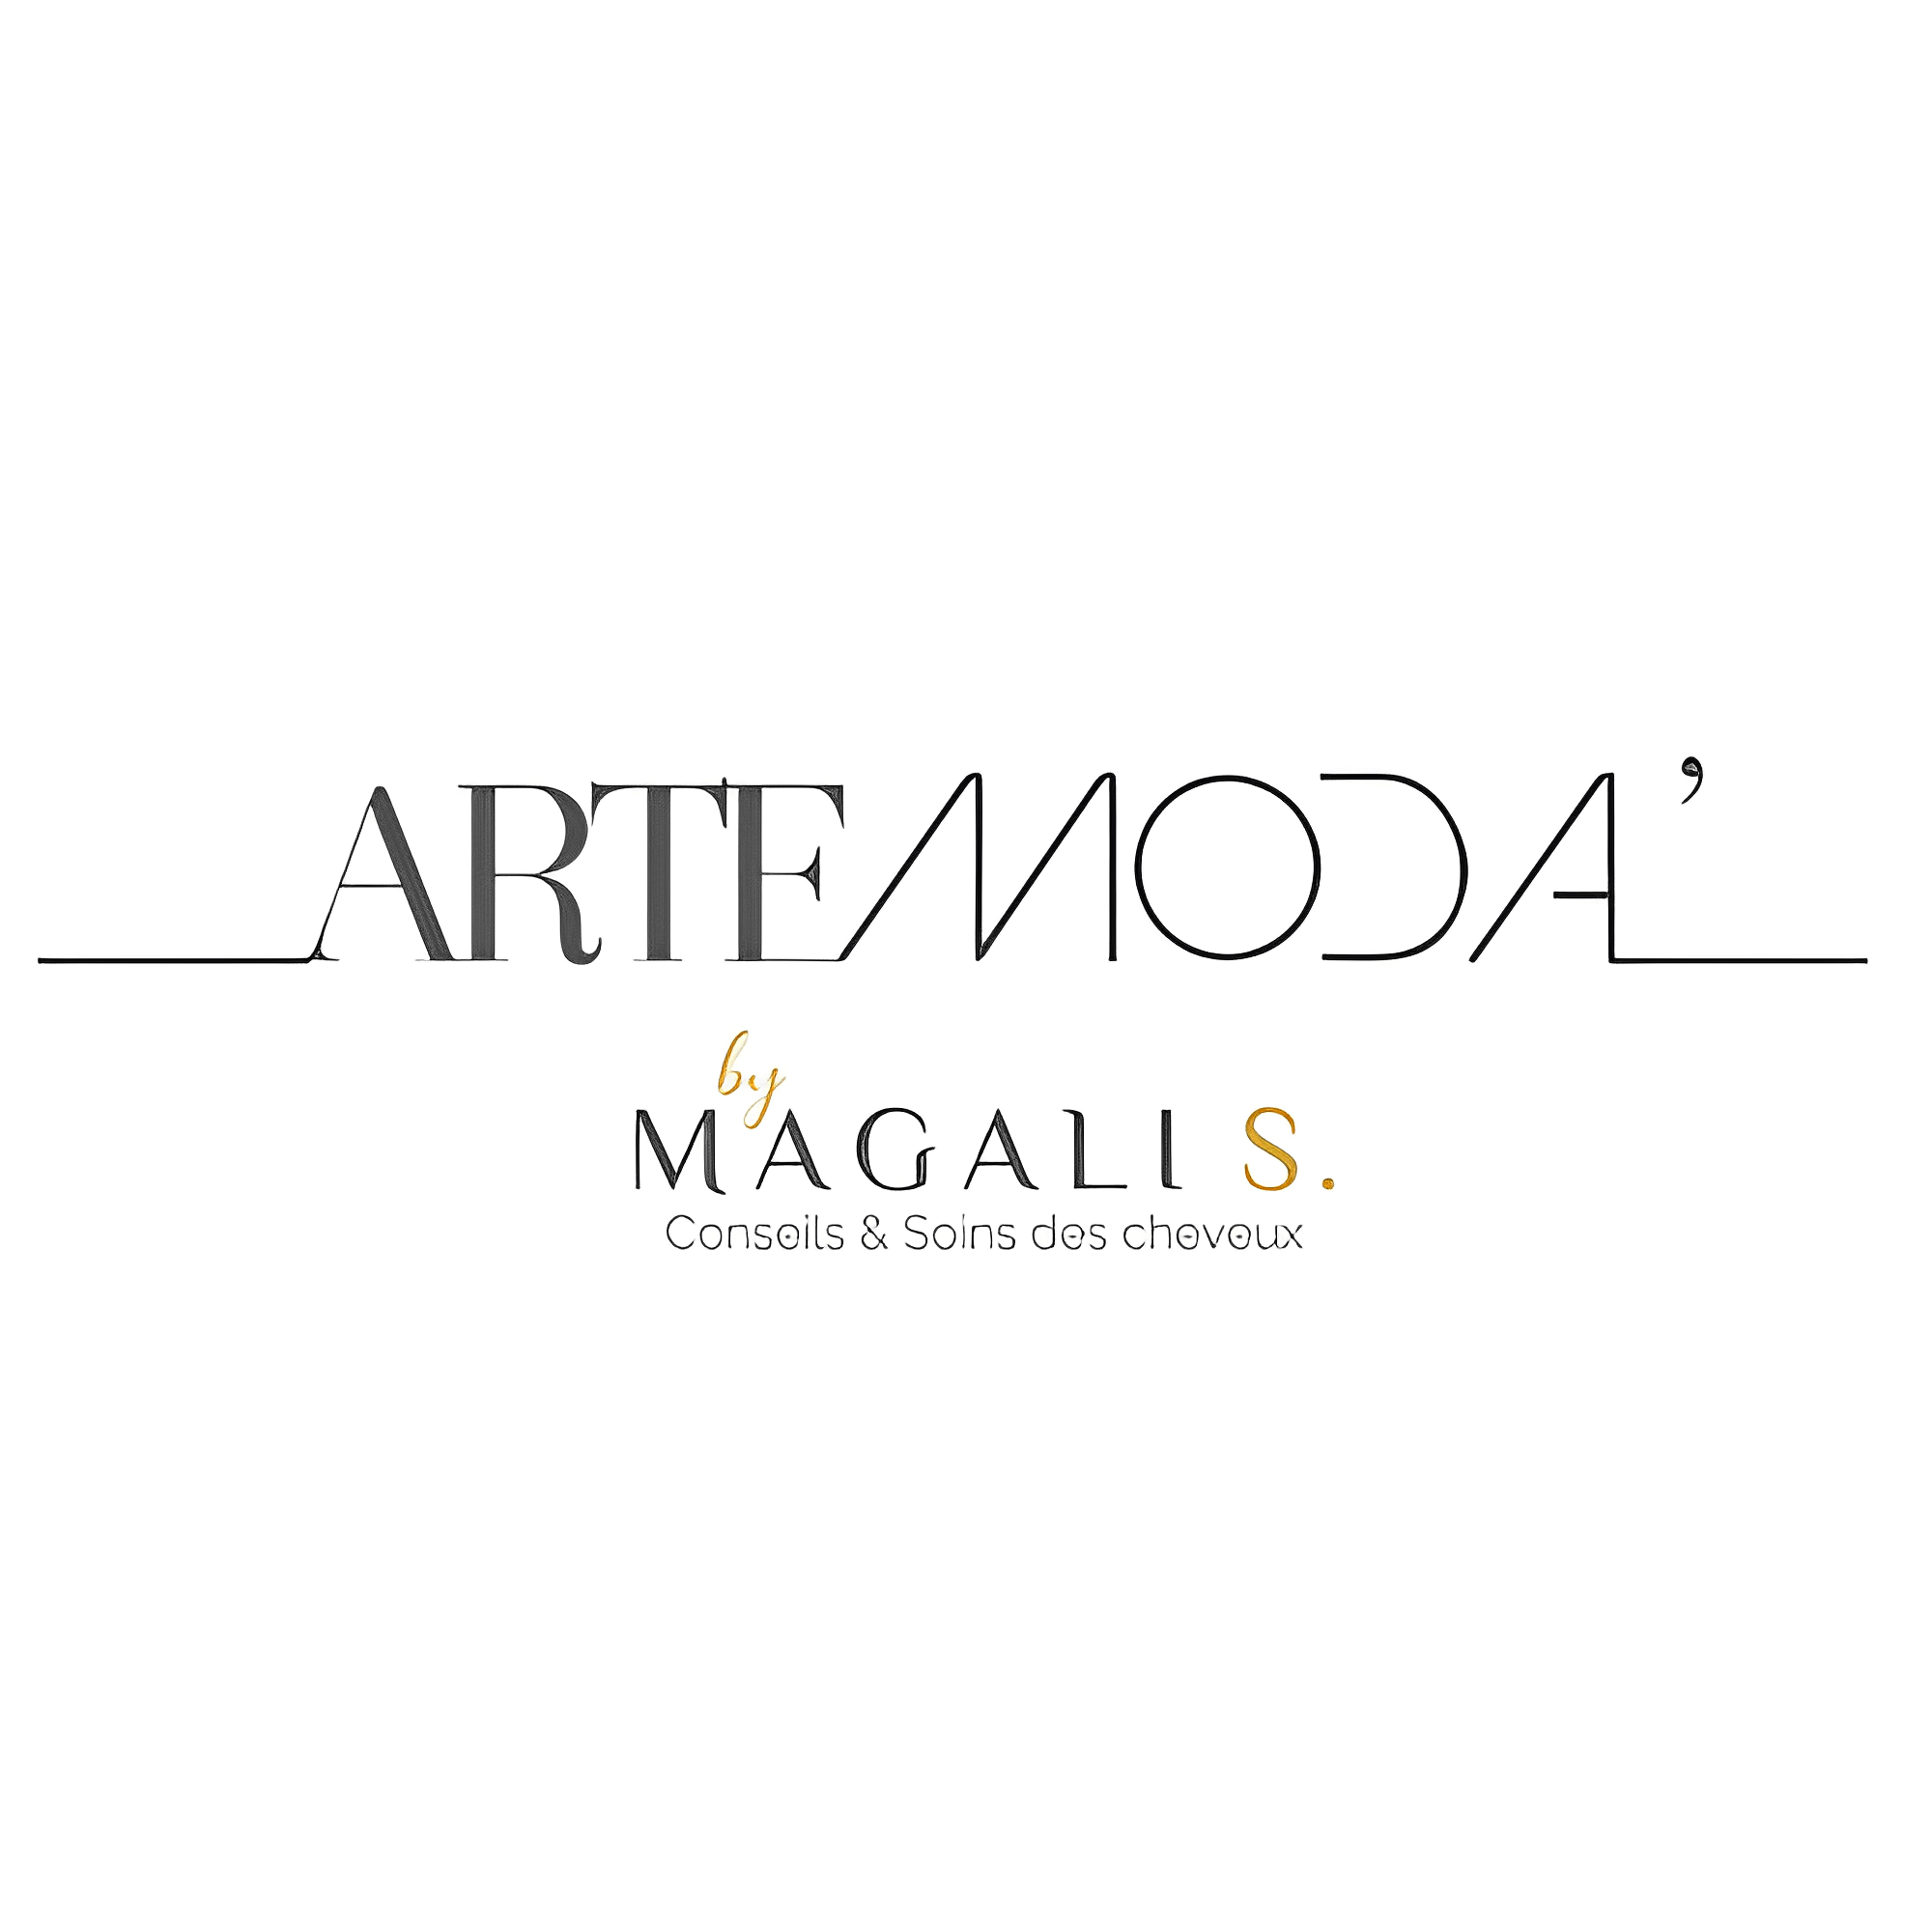 Artemoda by Magali S